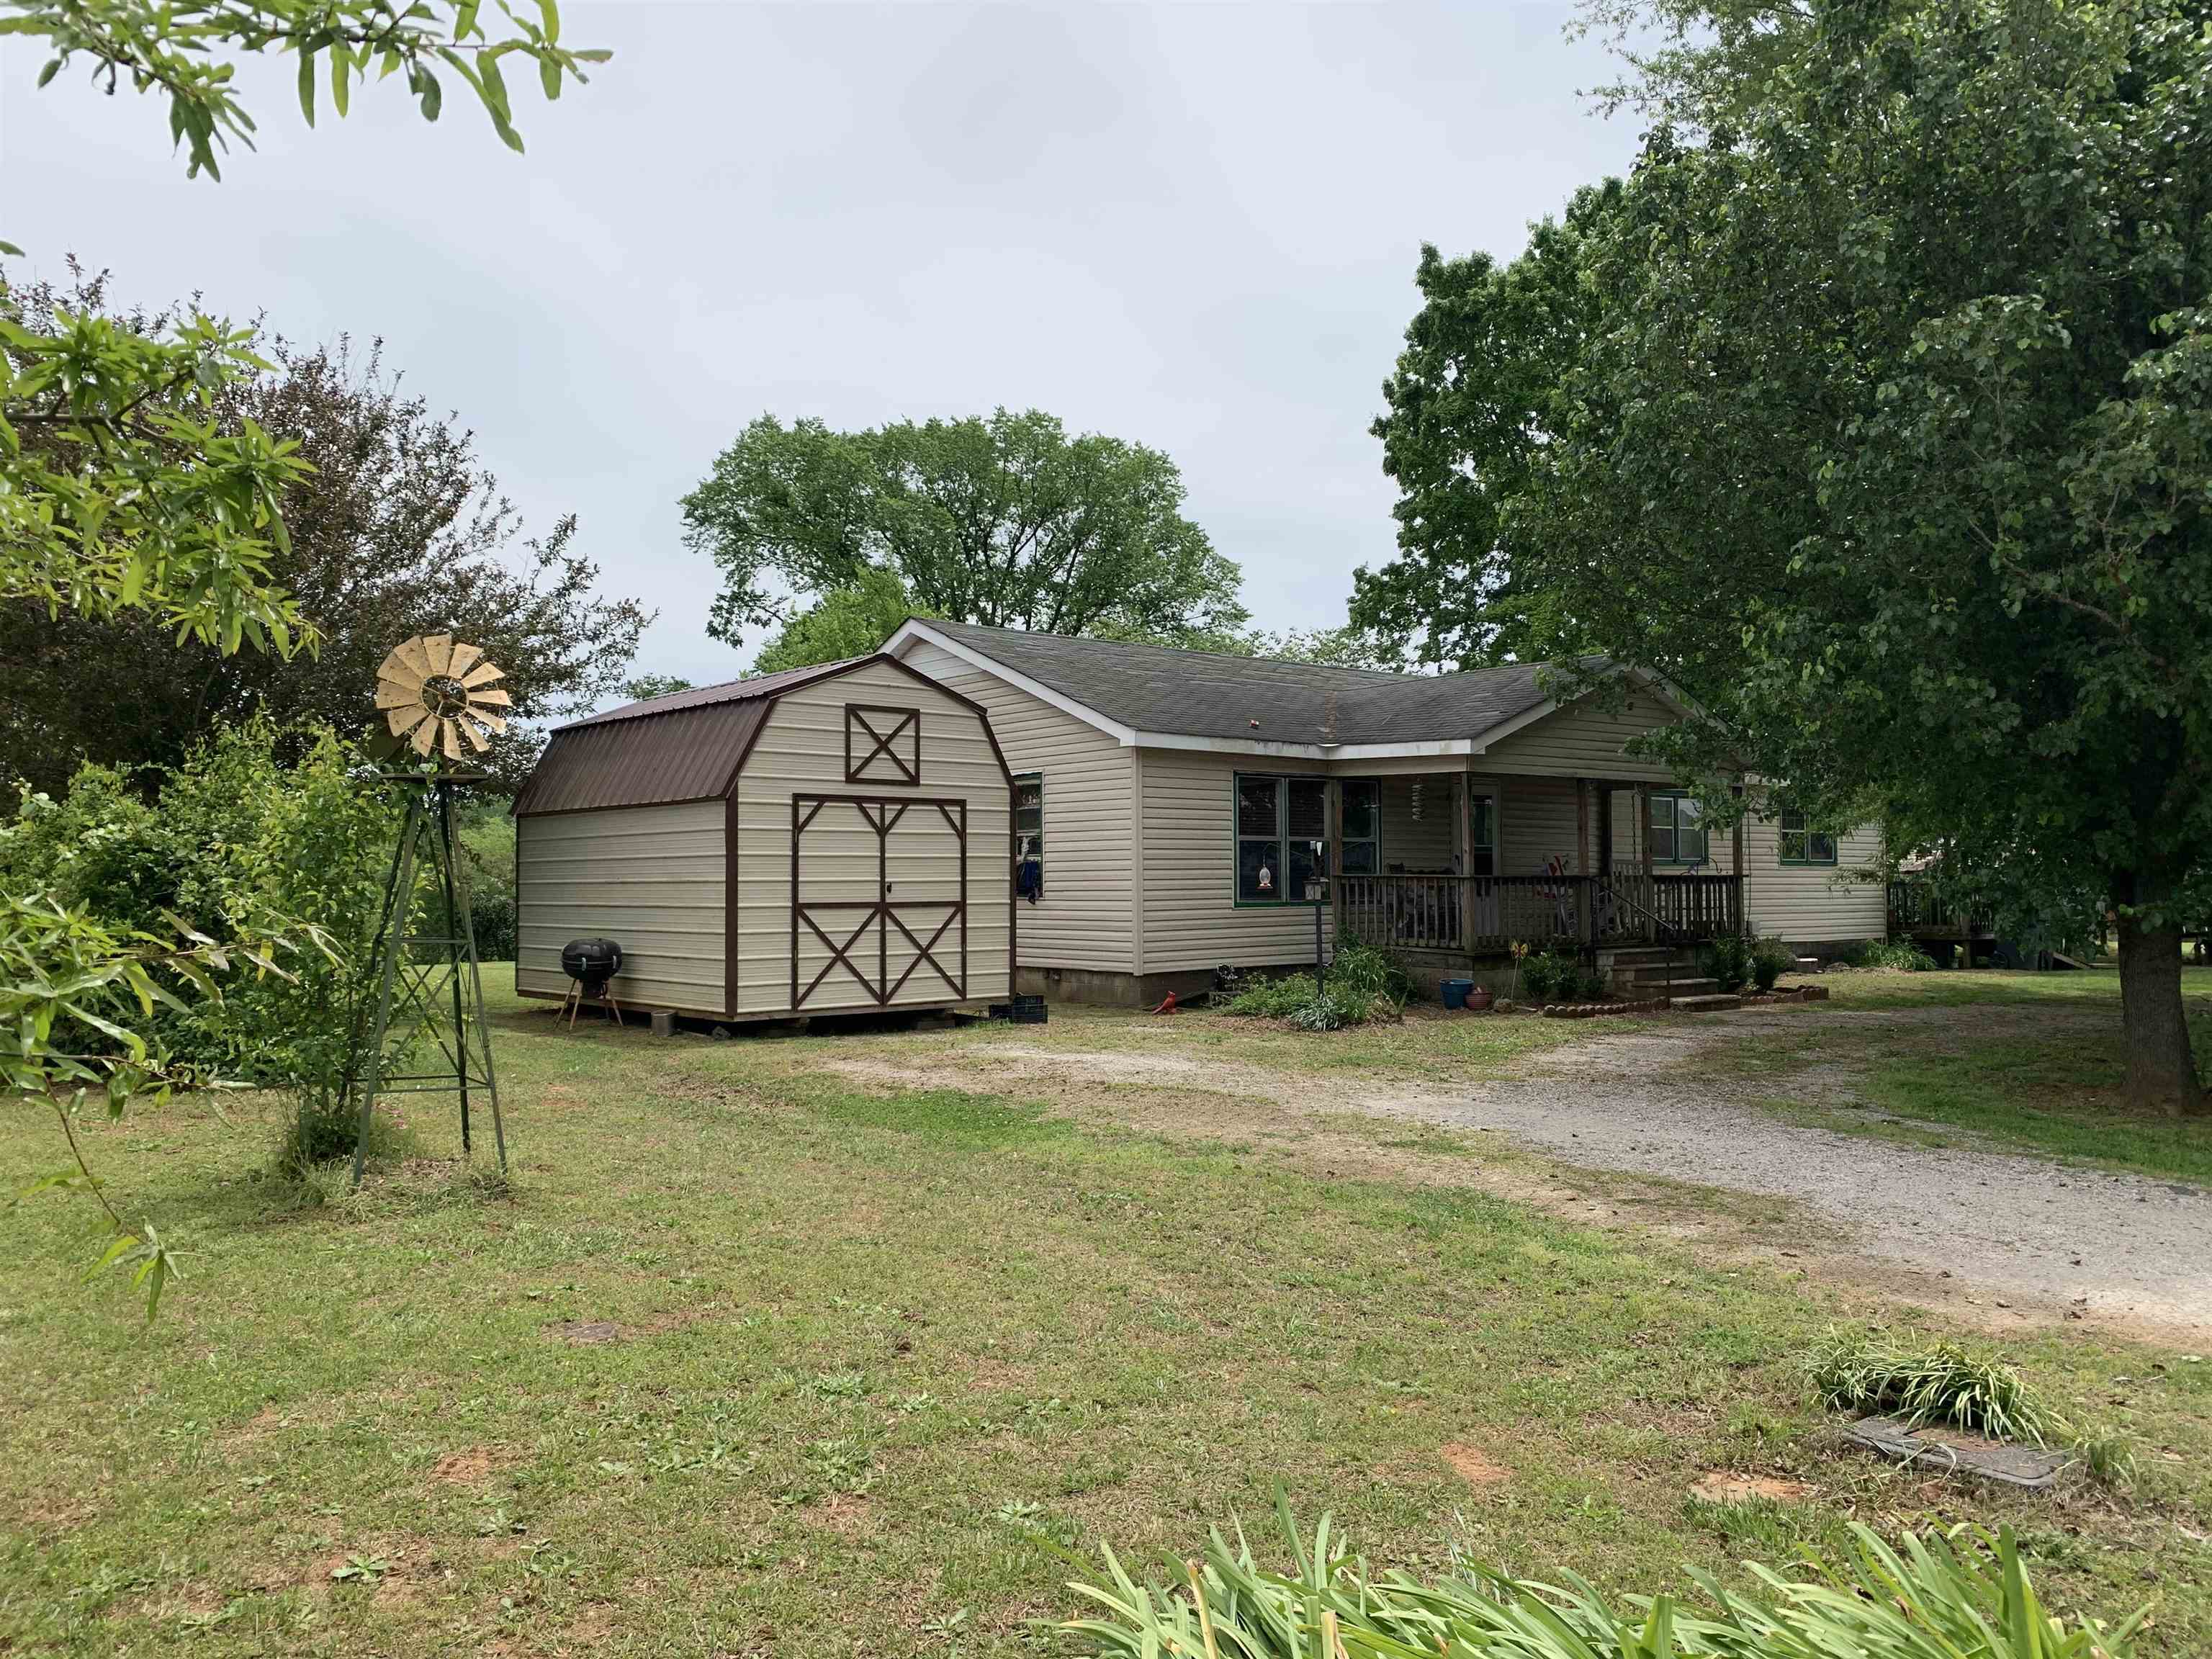 Quite little home just outside of the Russellville City limits.  This home has 2 acres of yard with big shade trees.  Perfect setting to enjoy family time.  The house boasts 4 beds and lots of space.  This area is highly sought after.  Don't miss out.  All offers must be submitted by May 3rd at 10PM.  Buyer to verify all info in listing is correct.